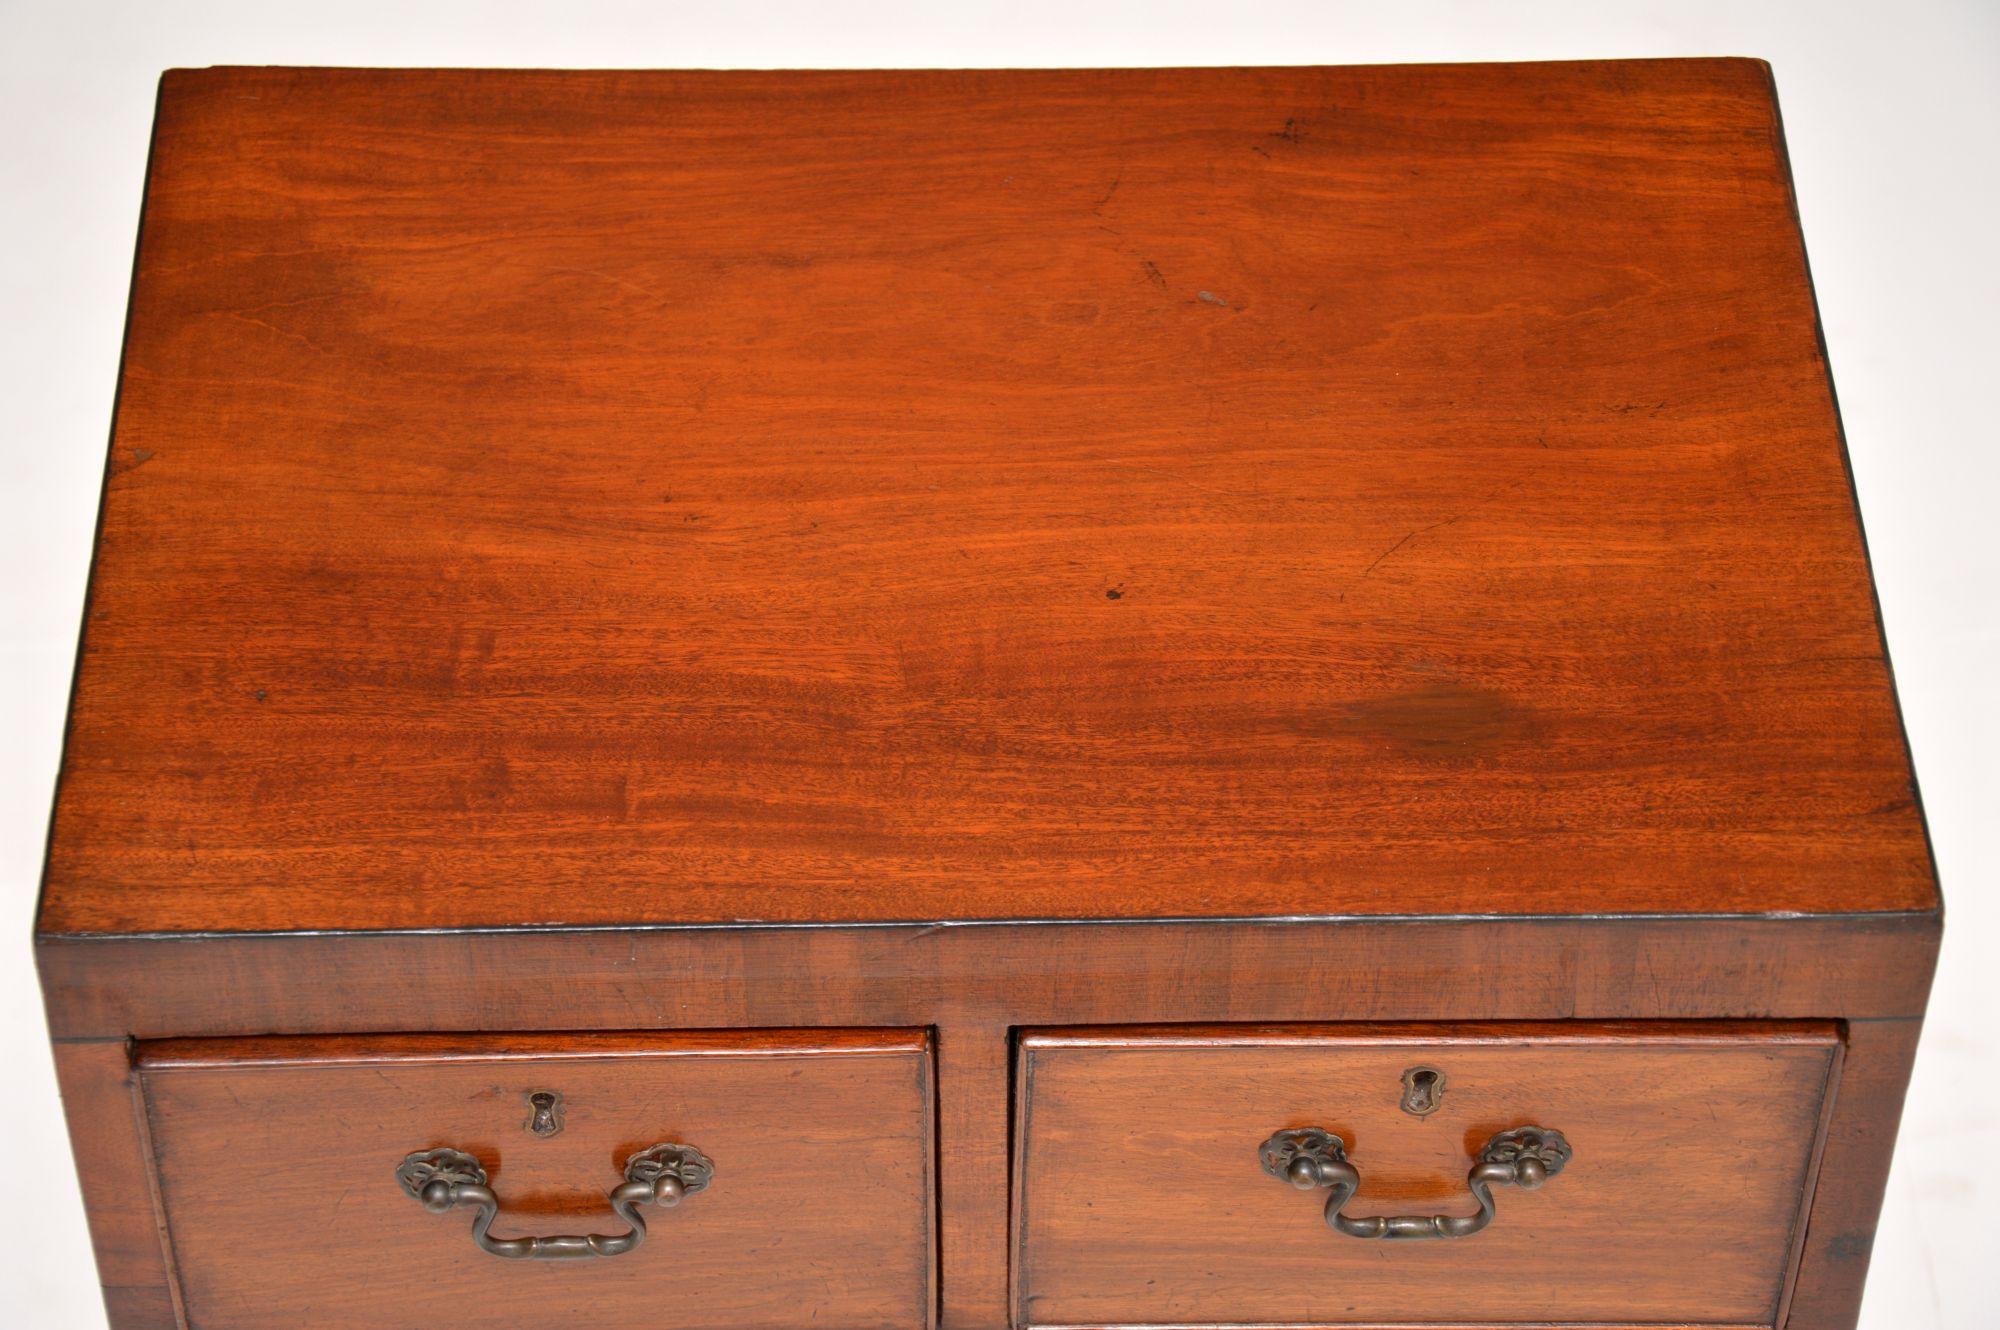 Early 19th Century Antique Mahogany Chest of Drawers